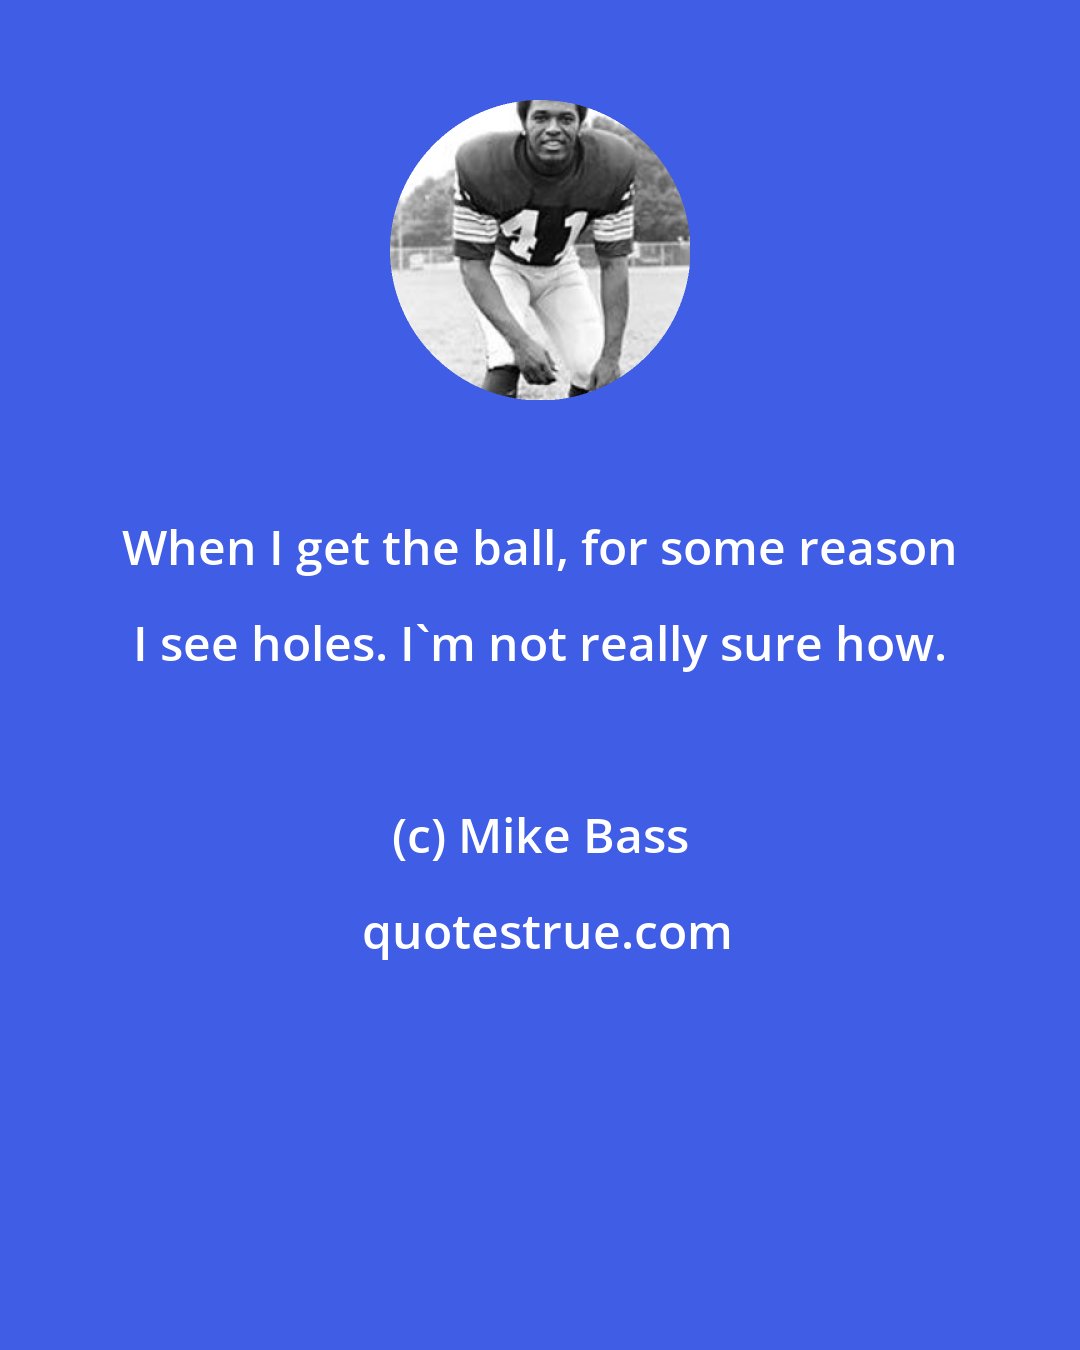 Mike Bass: When I get the ball, for some reason I see holes. I'm not really sure how.